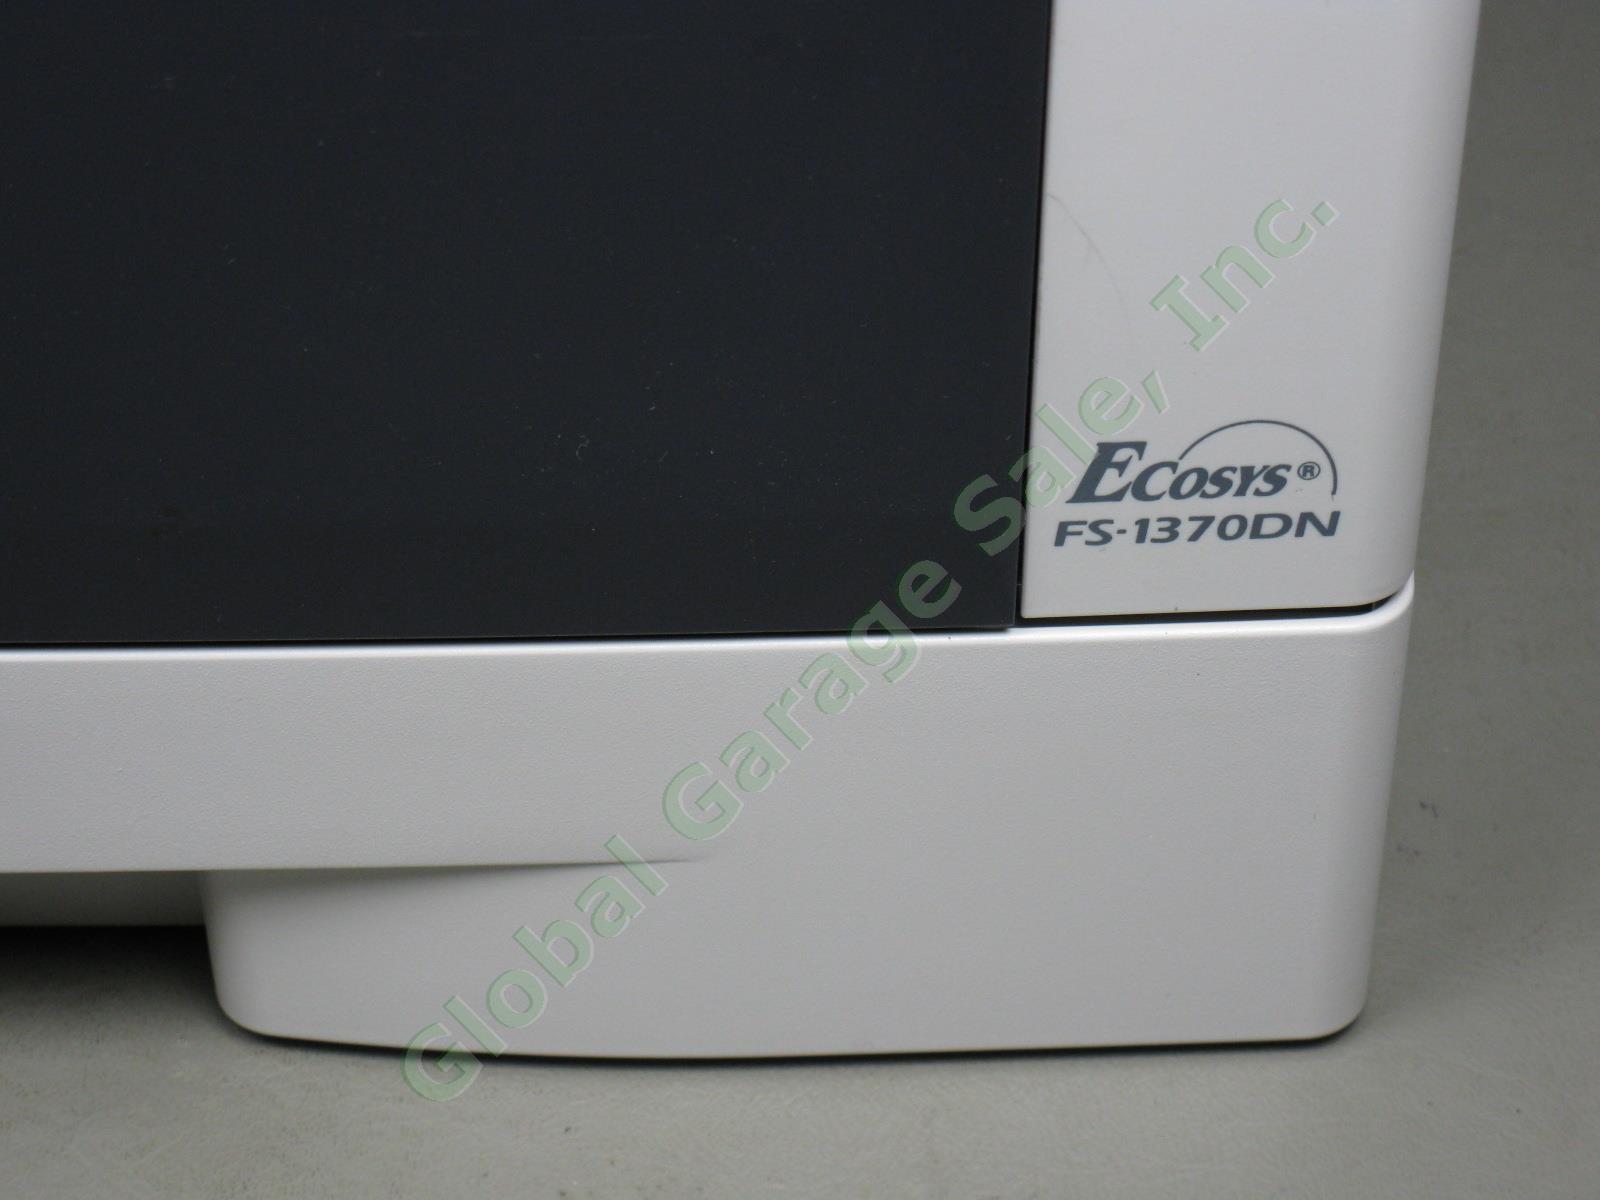 Kyocera Ecosys FS-1370DN Workgroup Network Laser Printer 40% Toner 6851 Pages 1